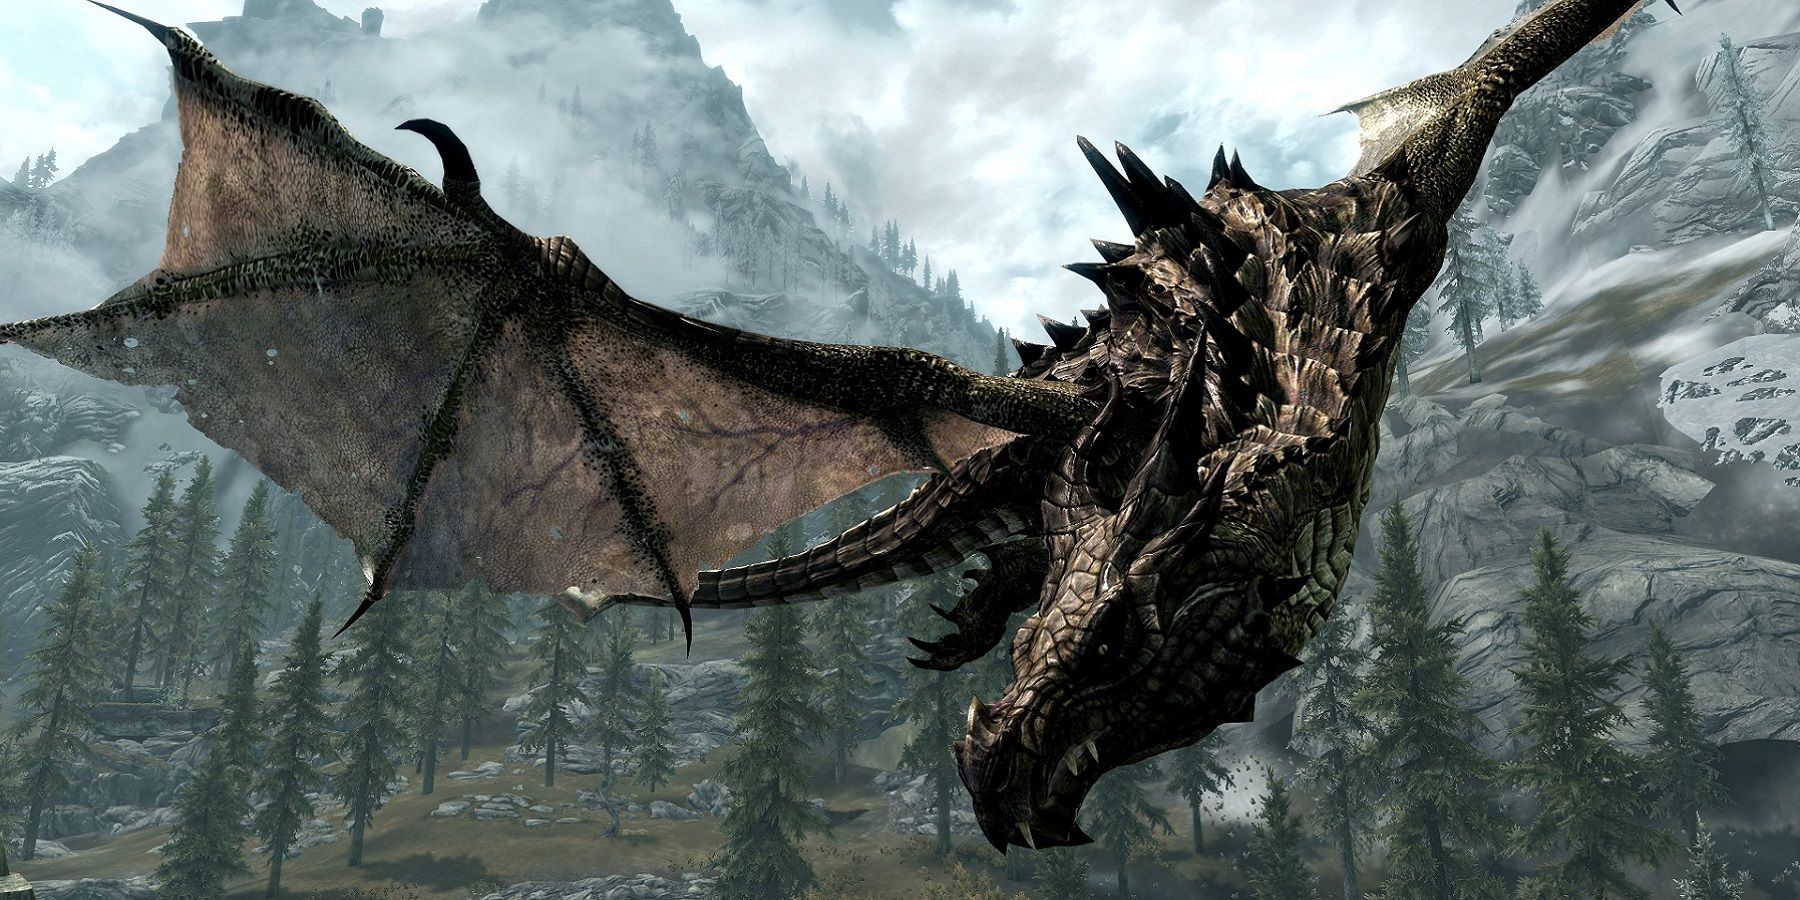 Image from The Elder Scrolls 5: skyrim showing a close-up of a dragon flying.